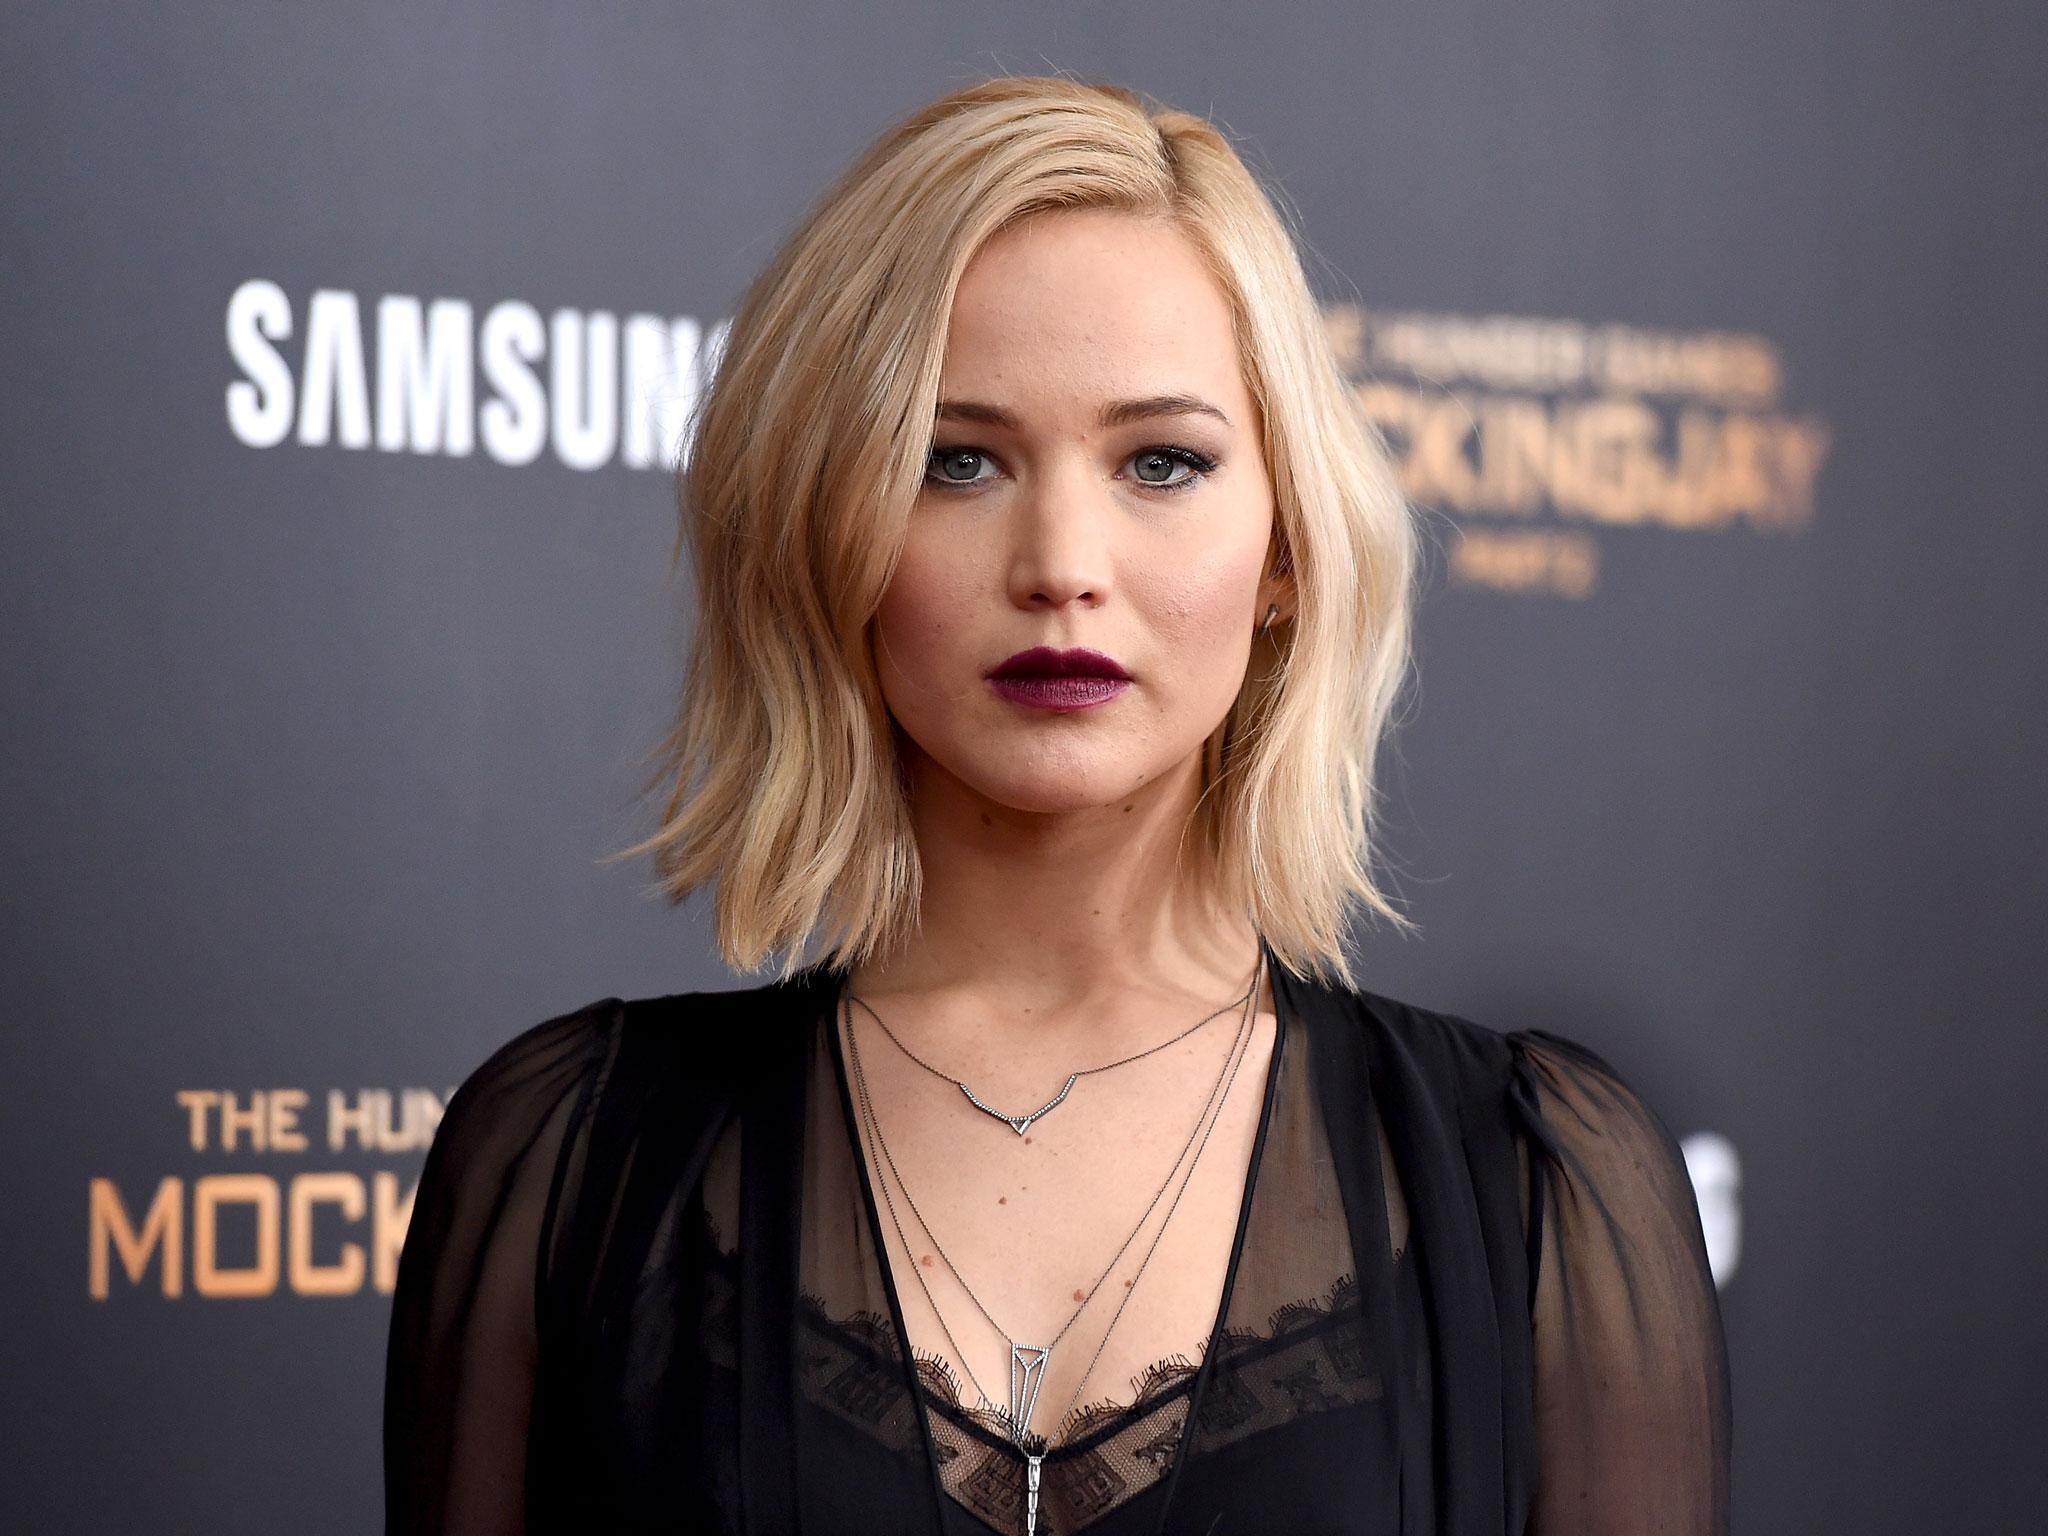 anna frances boyd recommends free nude pictures of jennifer lawrence pic